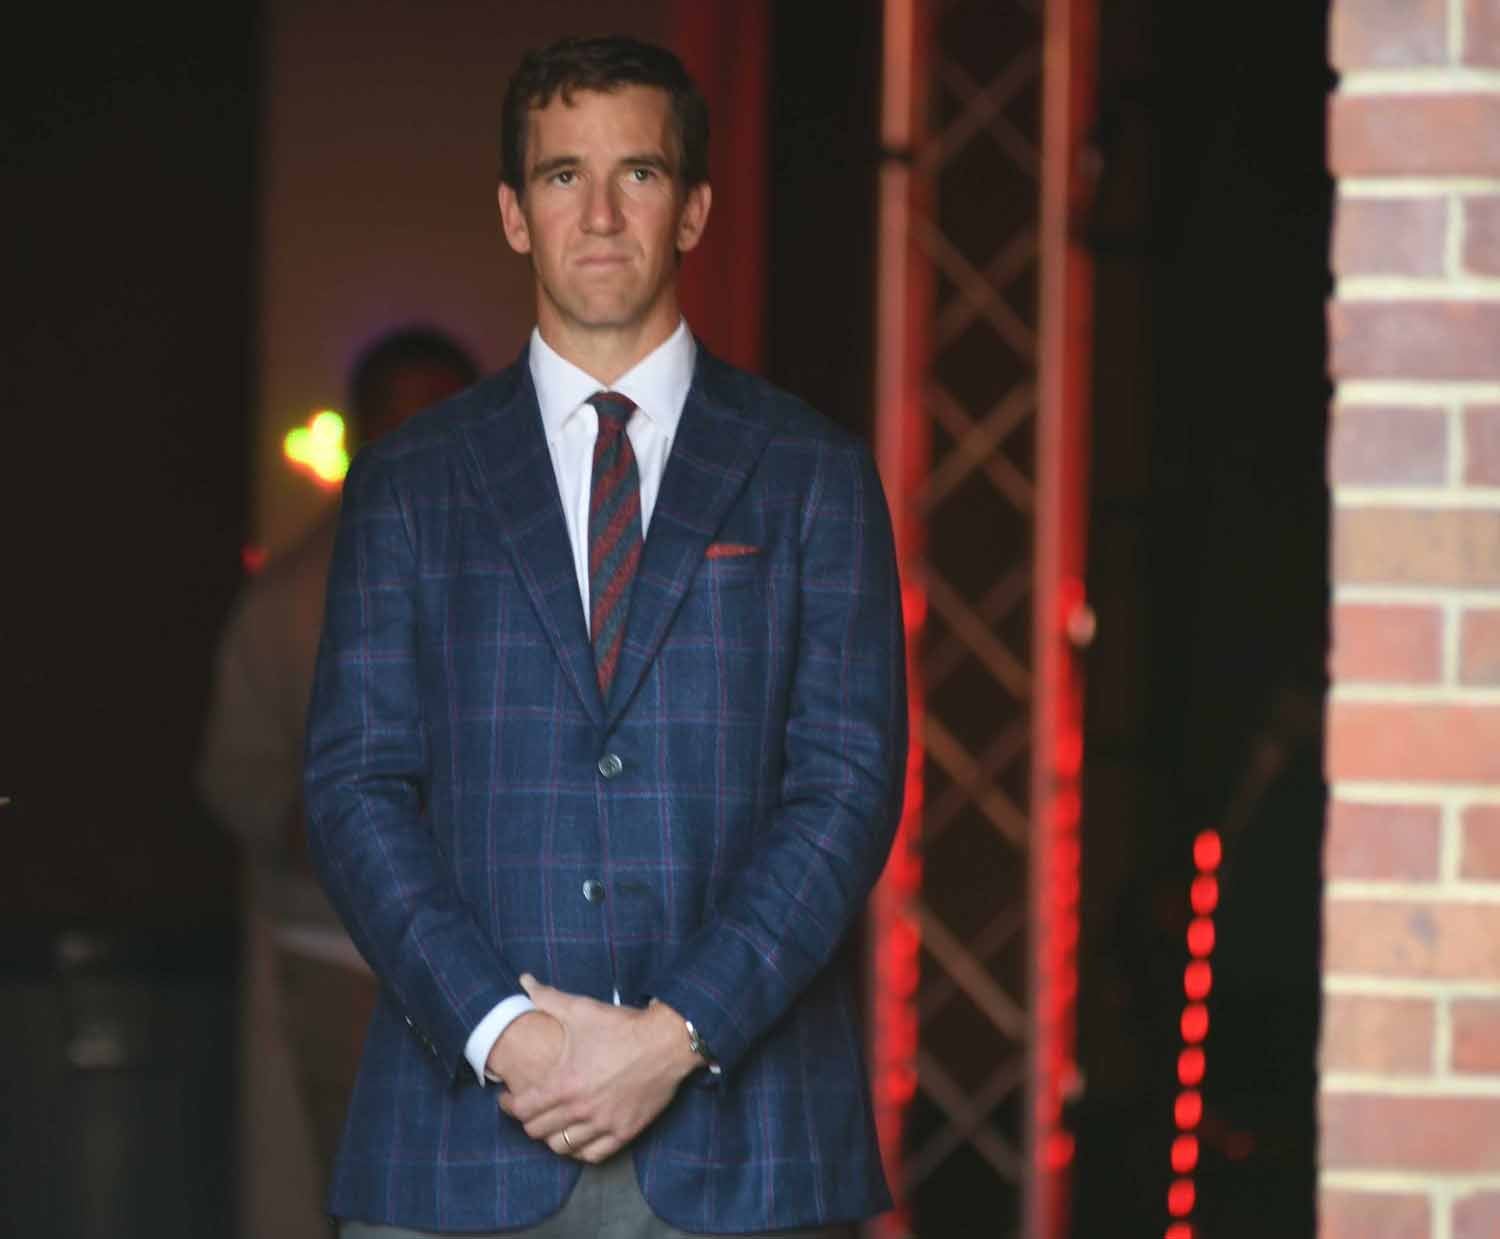 Ole Miss to Retire Eli Manning's Jersey Number